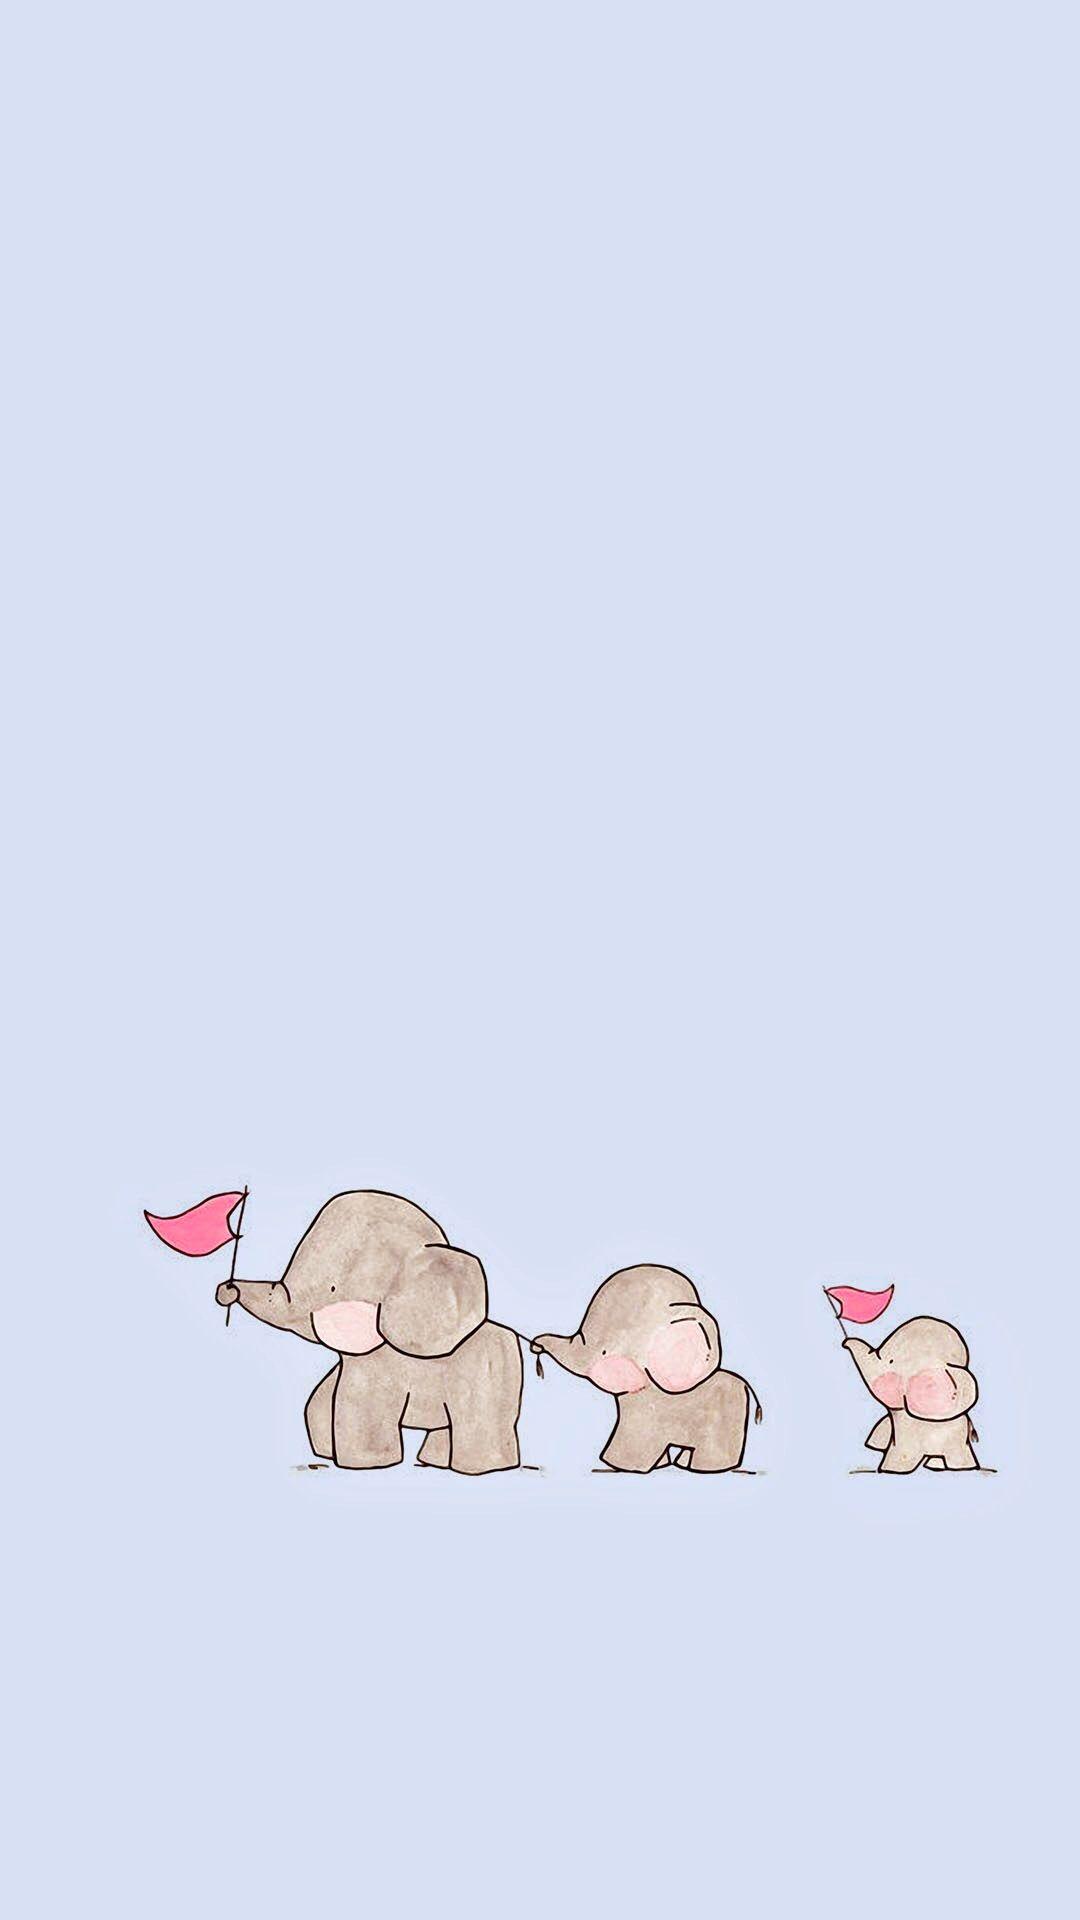 IPhone wallpaper of a family of elephants with a blue background - Elephant